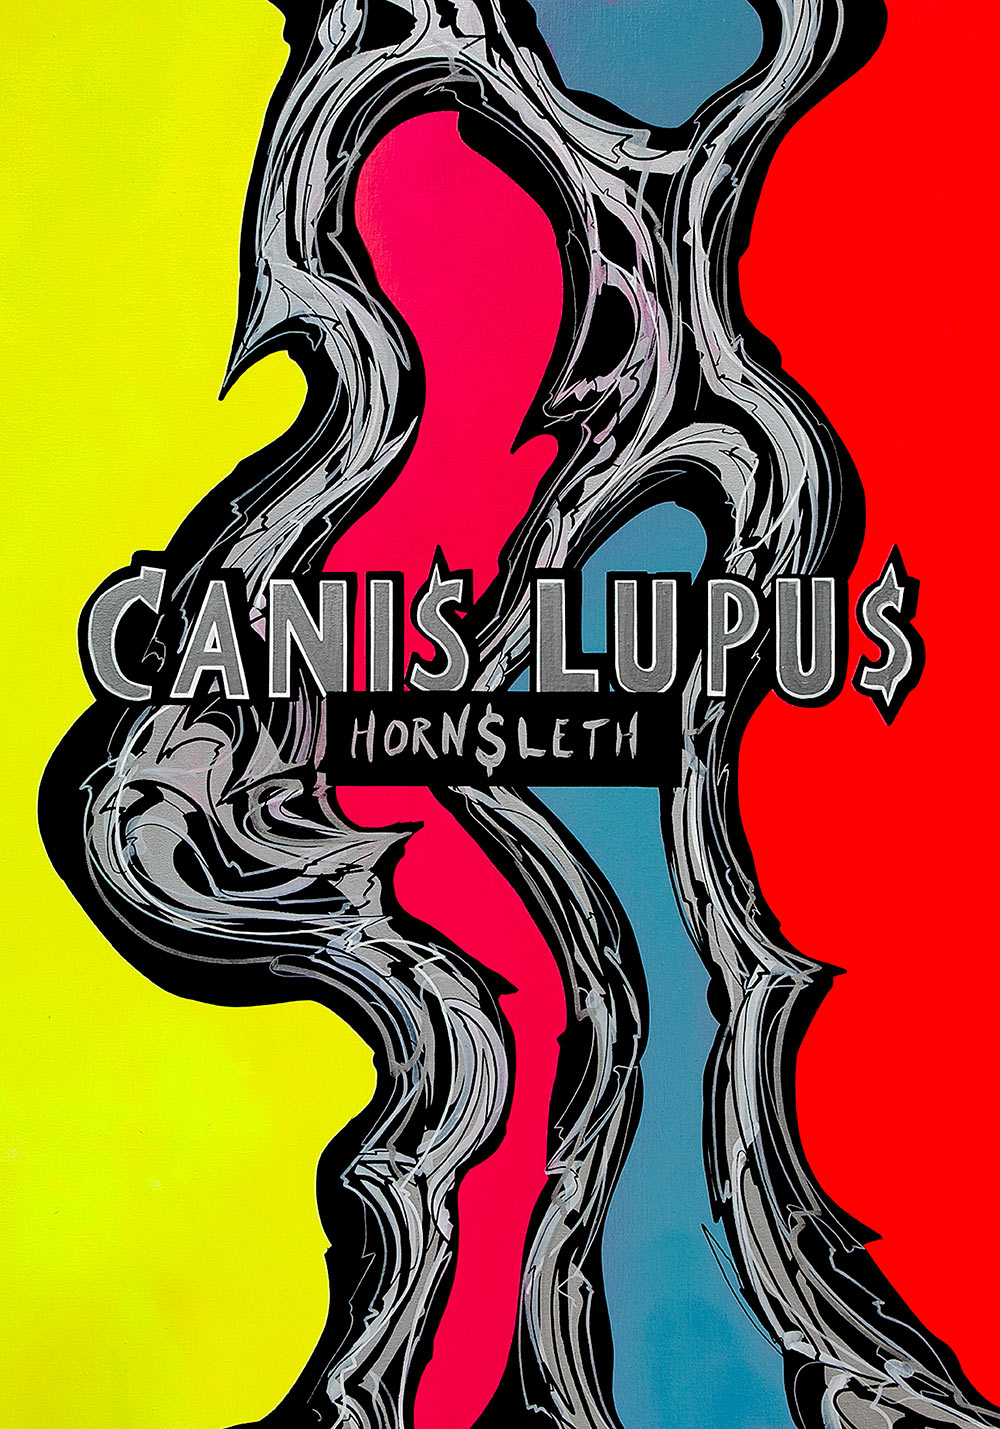 Canis Lupus 2019 – Poster by Hornsleth